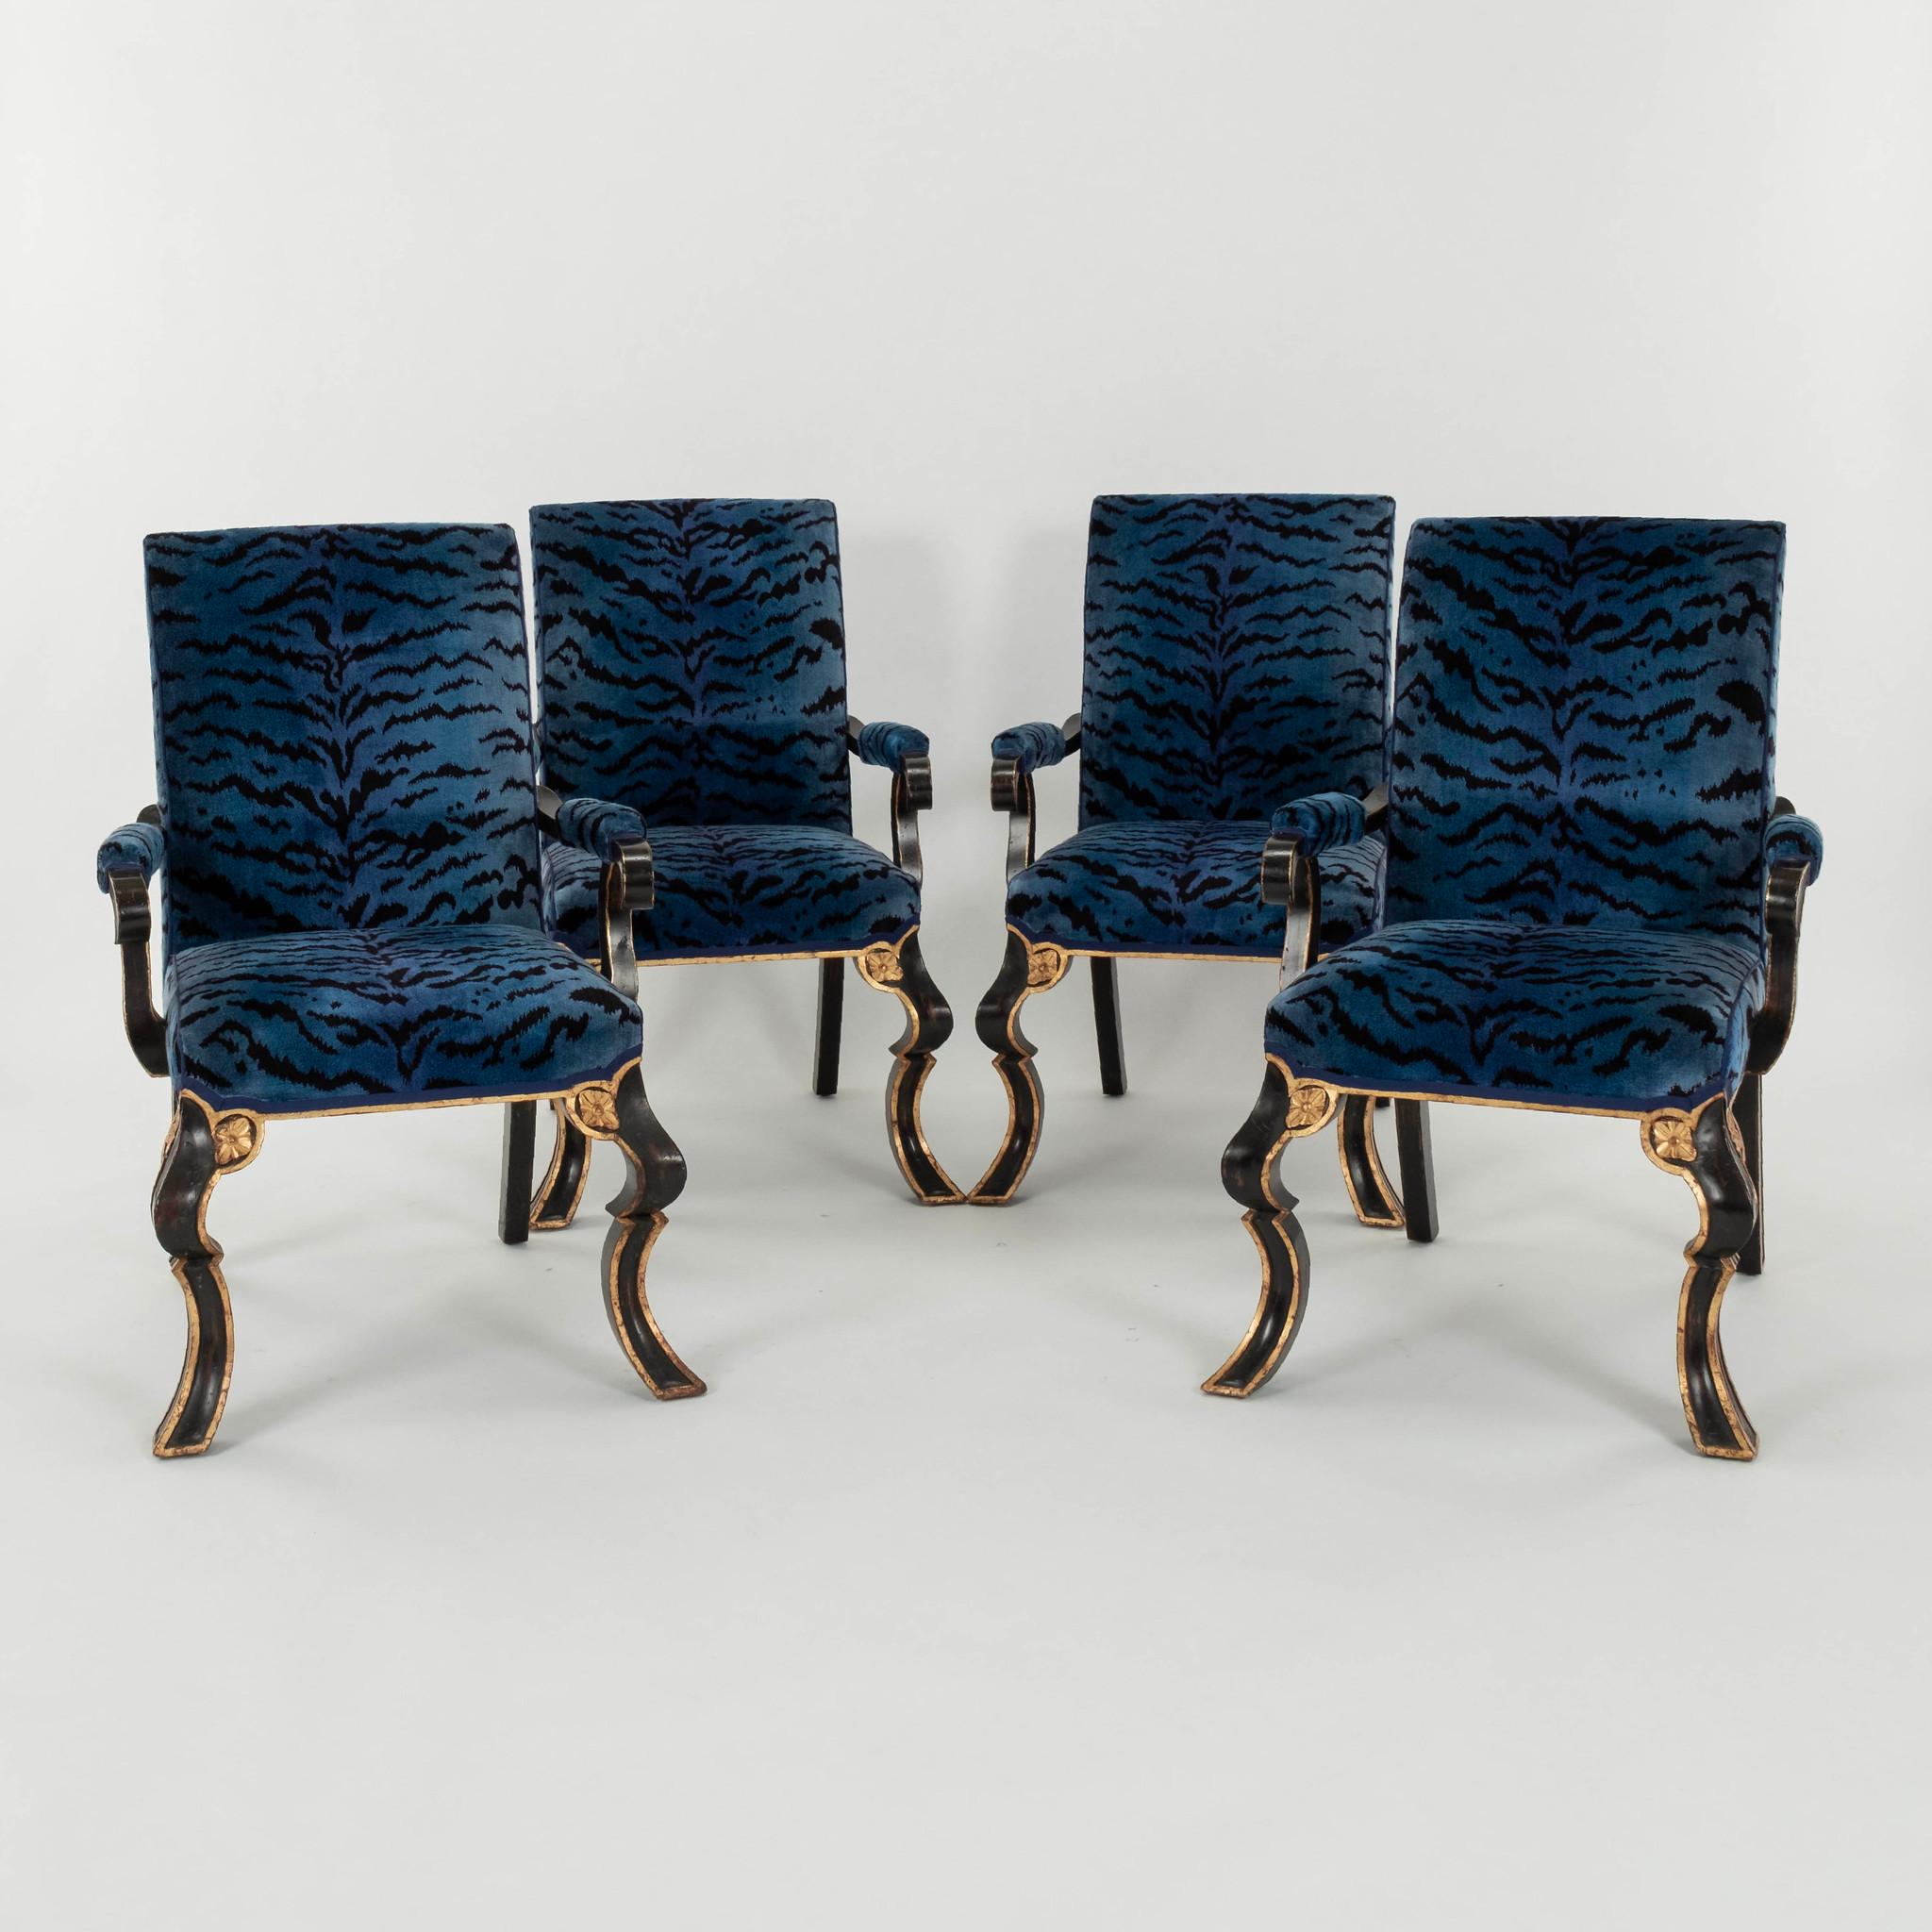 21st Century Rose Tarlow Melrose House Puccini arm chair(s), with modified frame, patinated, 22K gold trim, blue Scalamandré Tigre Velvet Blue.

Four available, sold individually $3,400.00each.
